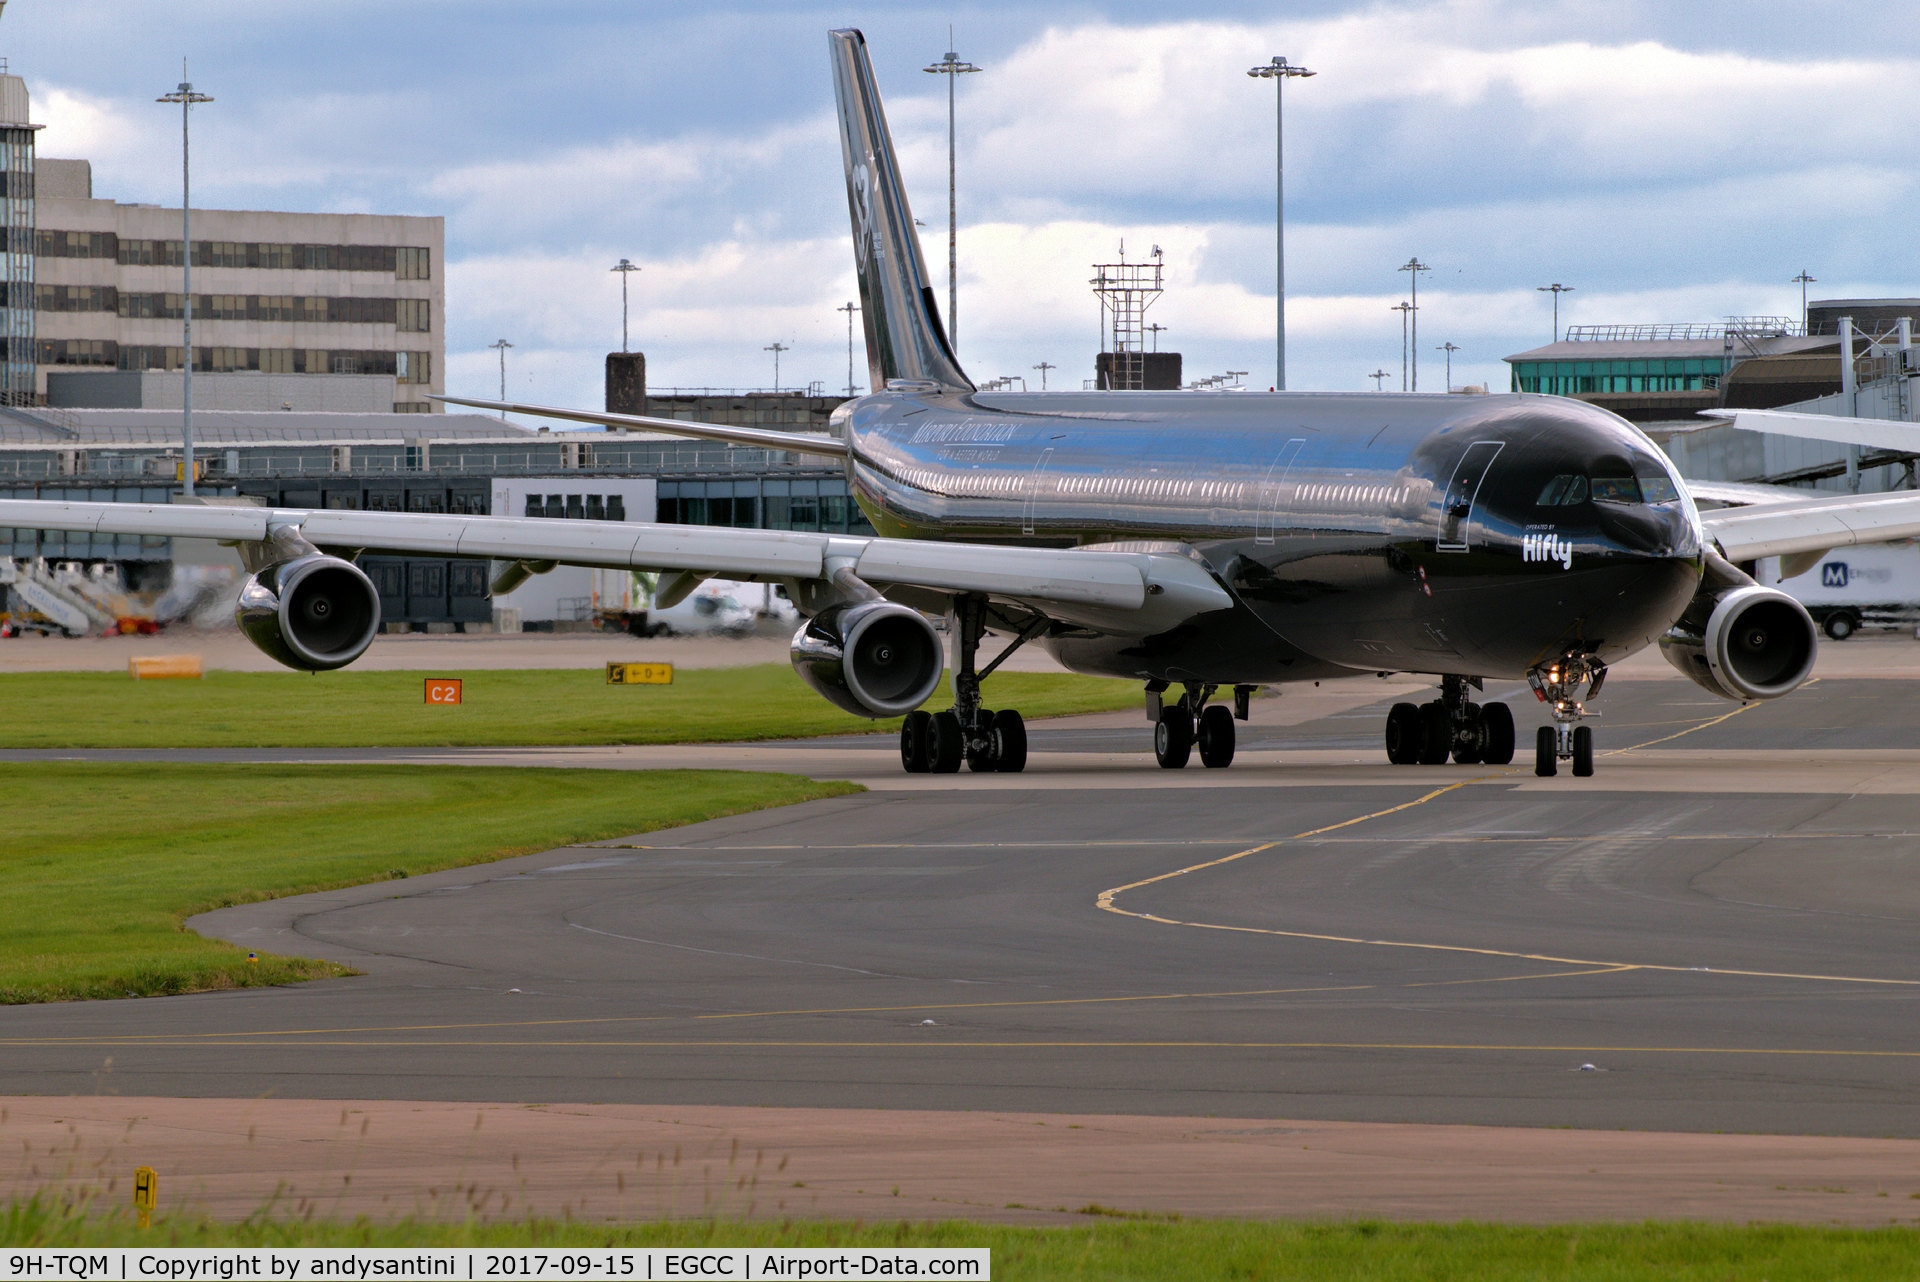 9H-TQM, 1995 Airbus A340-313 C/N 117, taxing out for take off @ egcc uk.